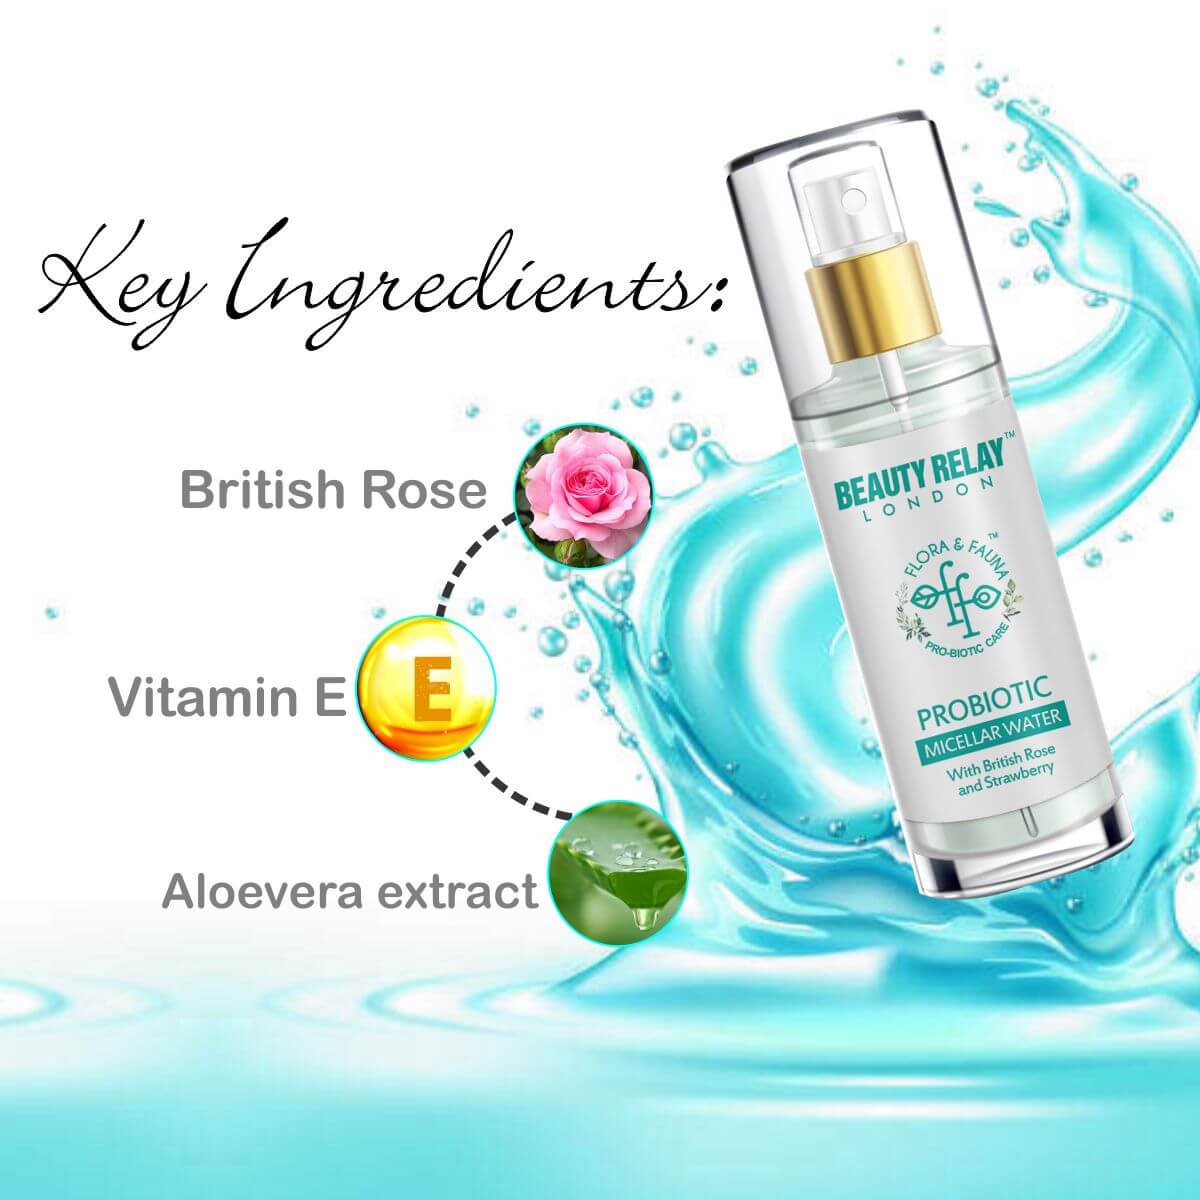 Micellar Water With British Rose - Beauty Relay India